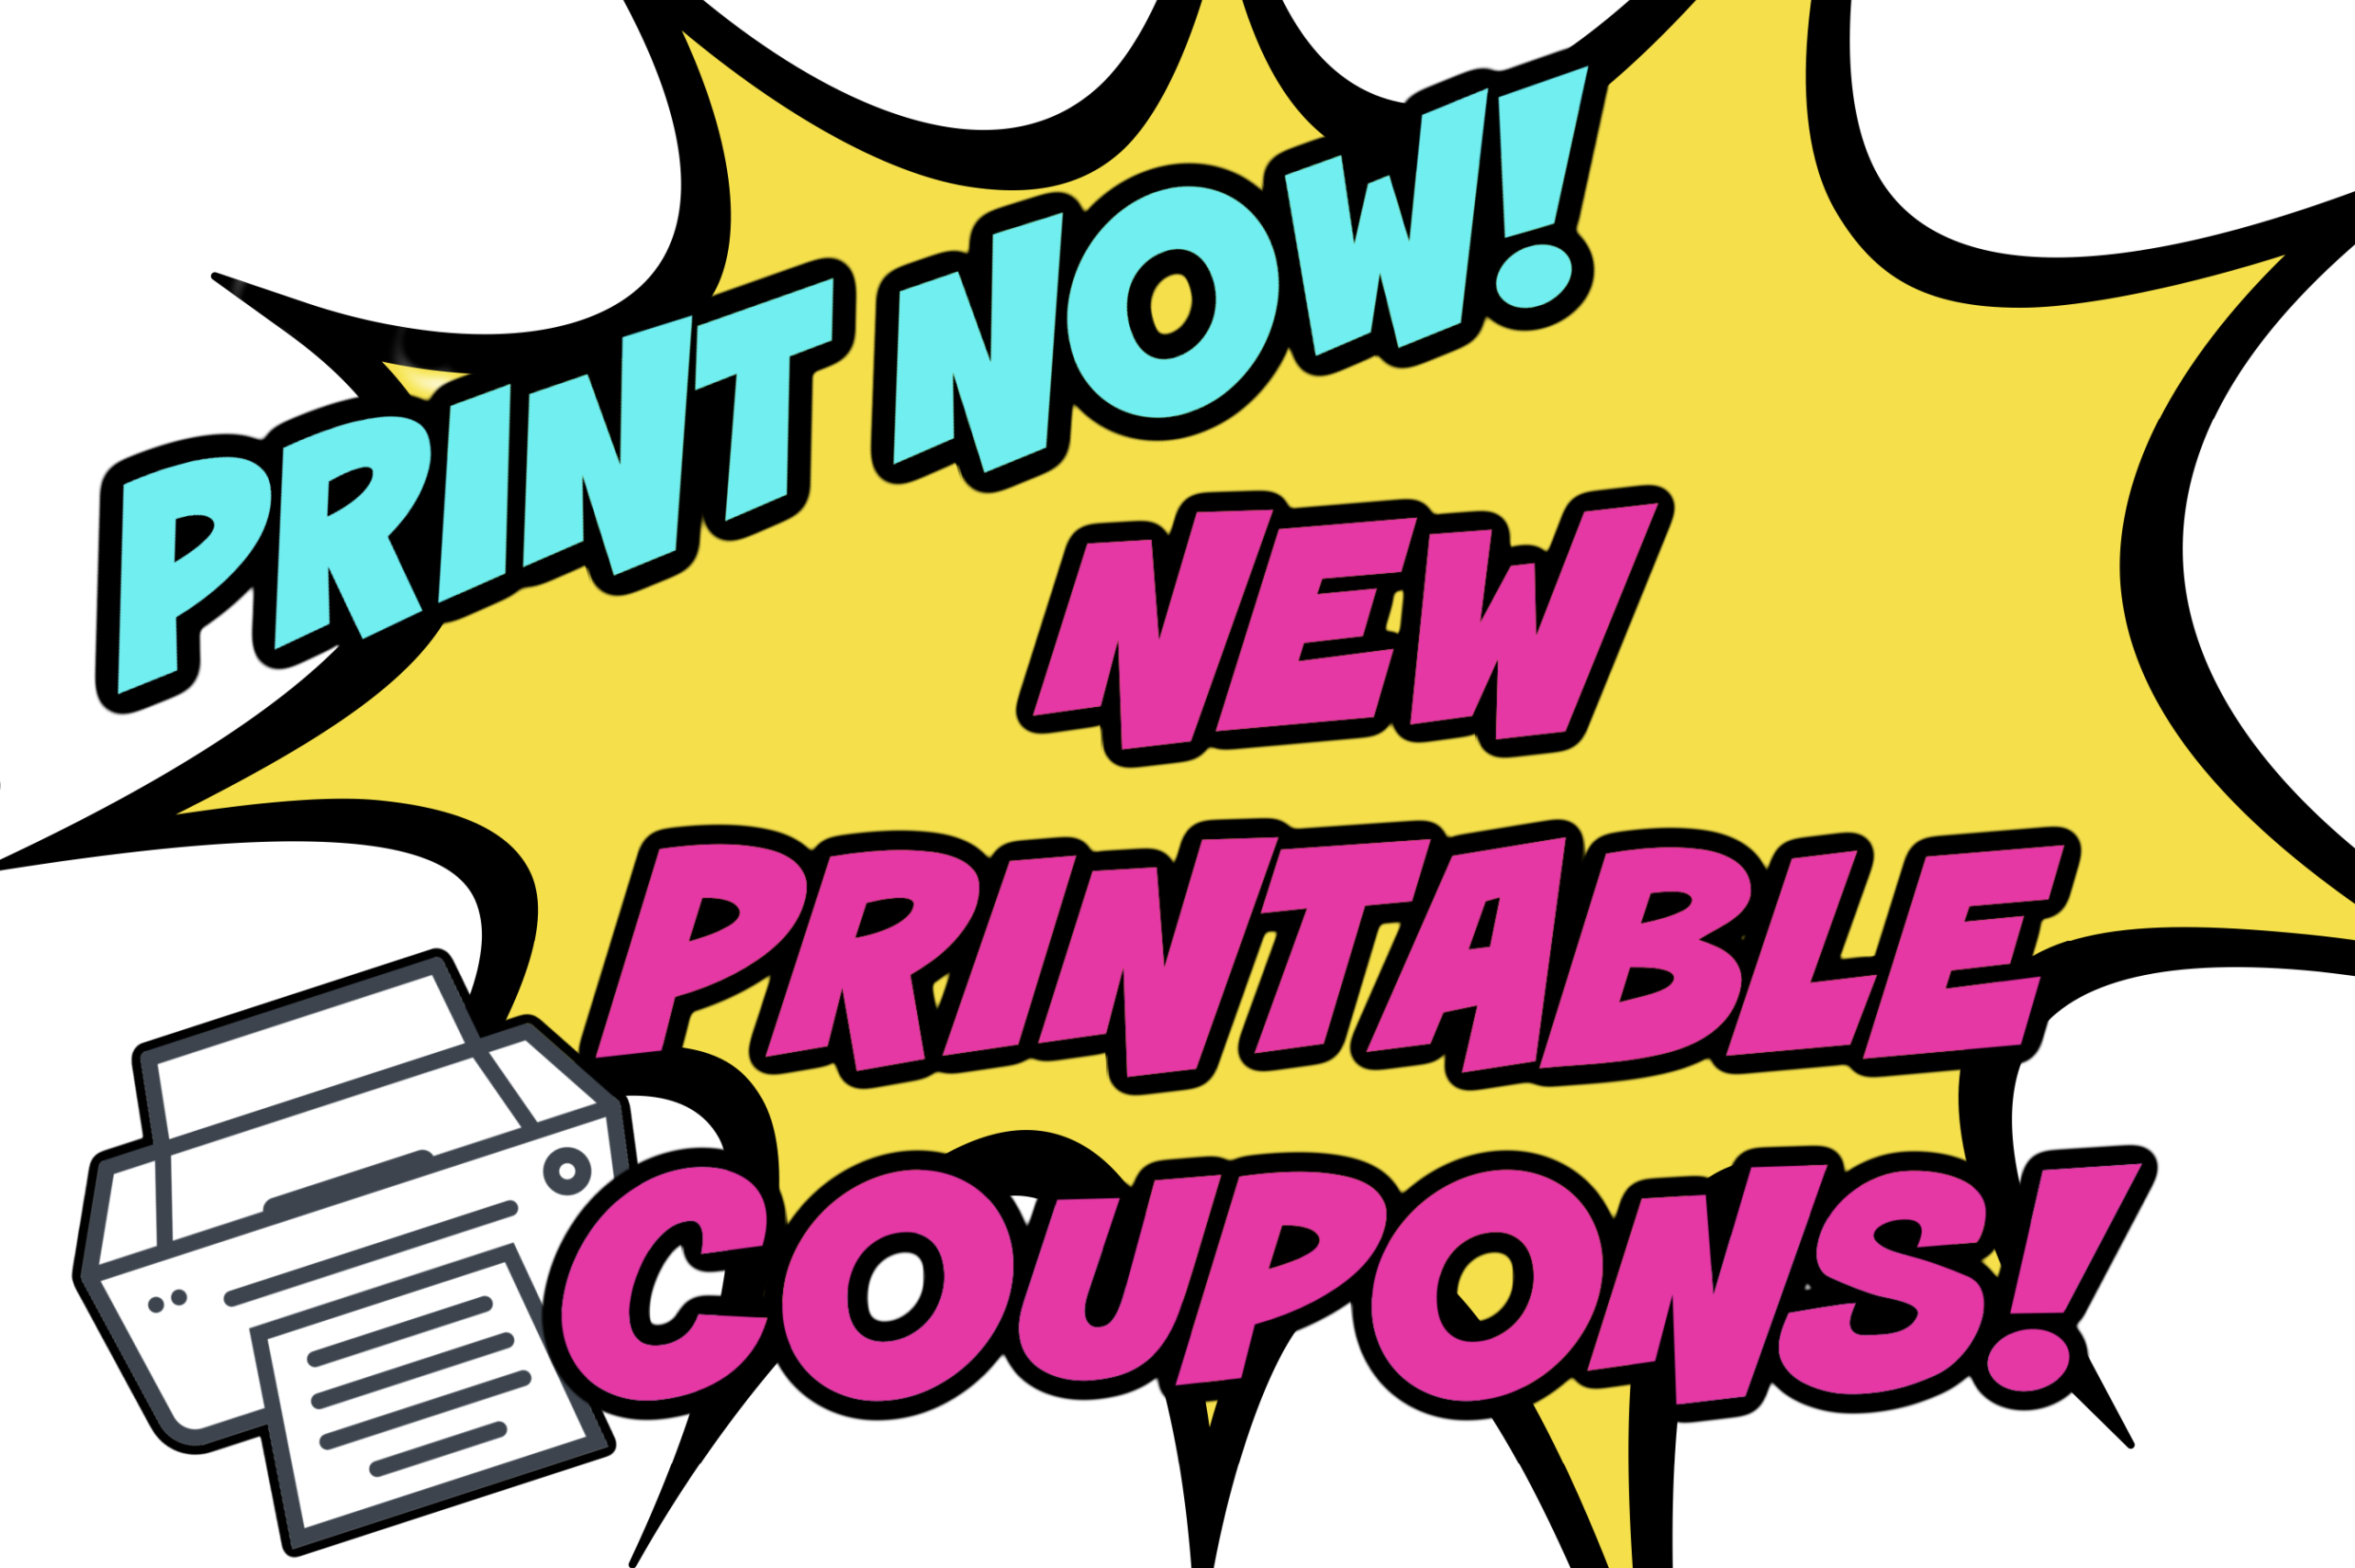 print-now-new-high-value-printable-coupons-persil-covergirl